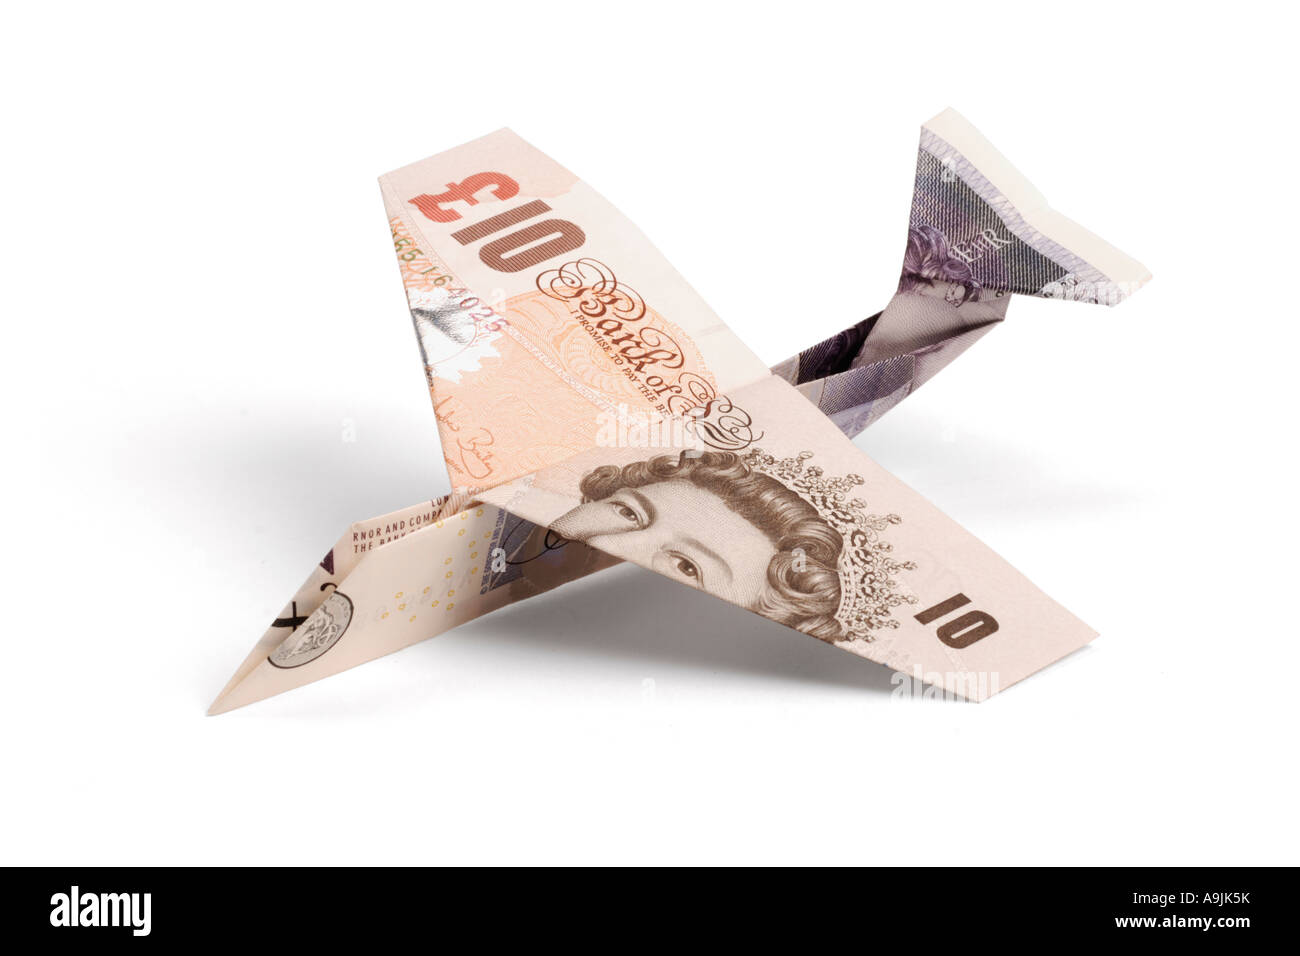 Airplane made of pound notes Stock Photo